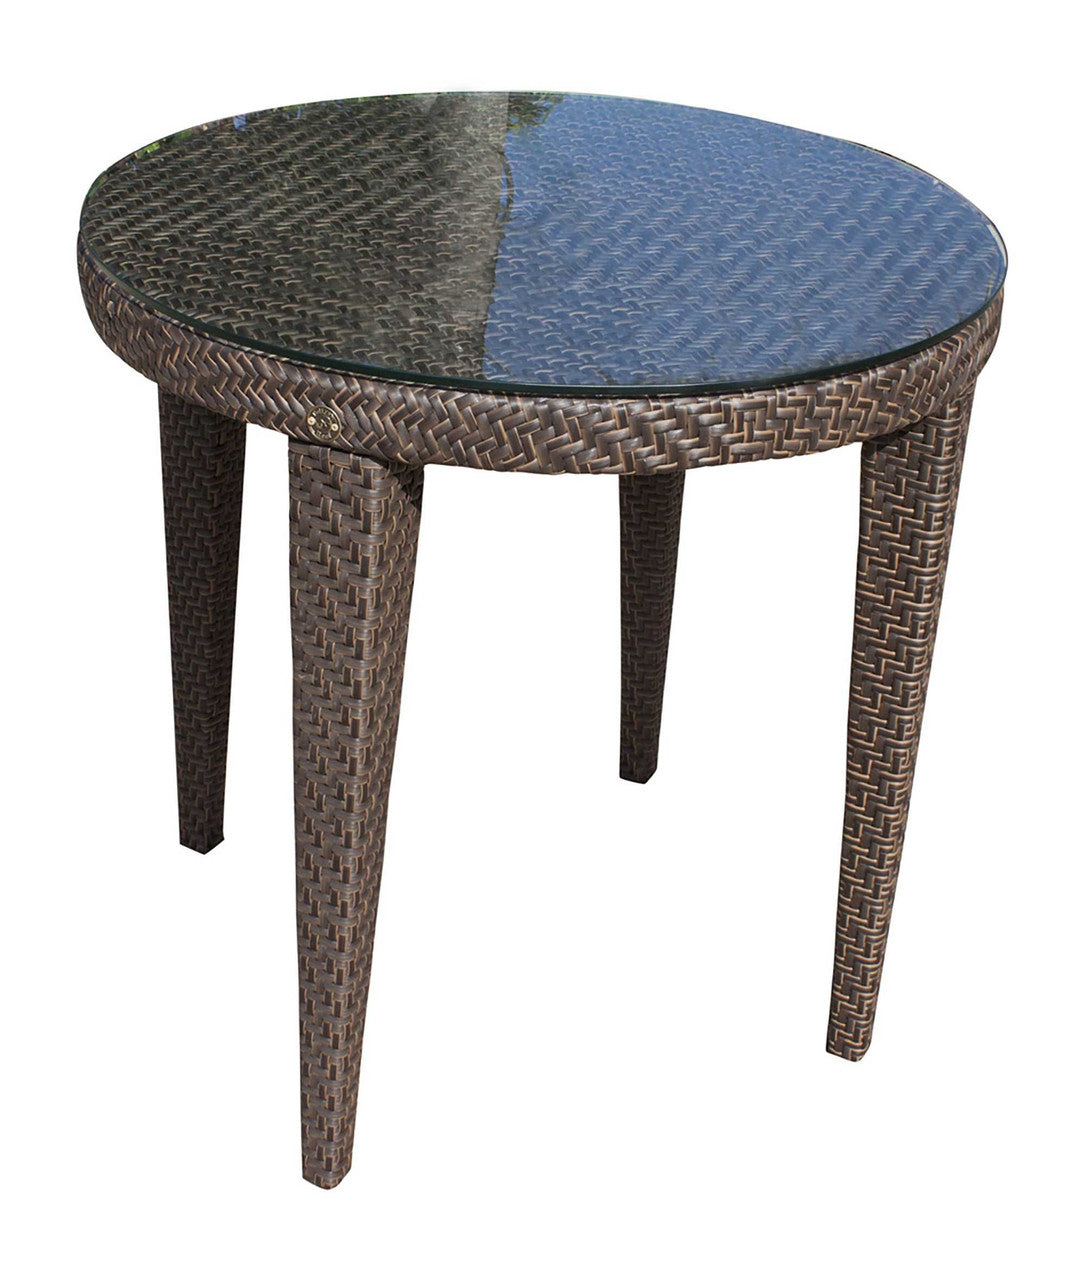 Hospitality Rattan Soho Patio Woven Round Dining 30" Table with Glass